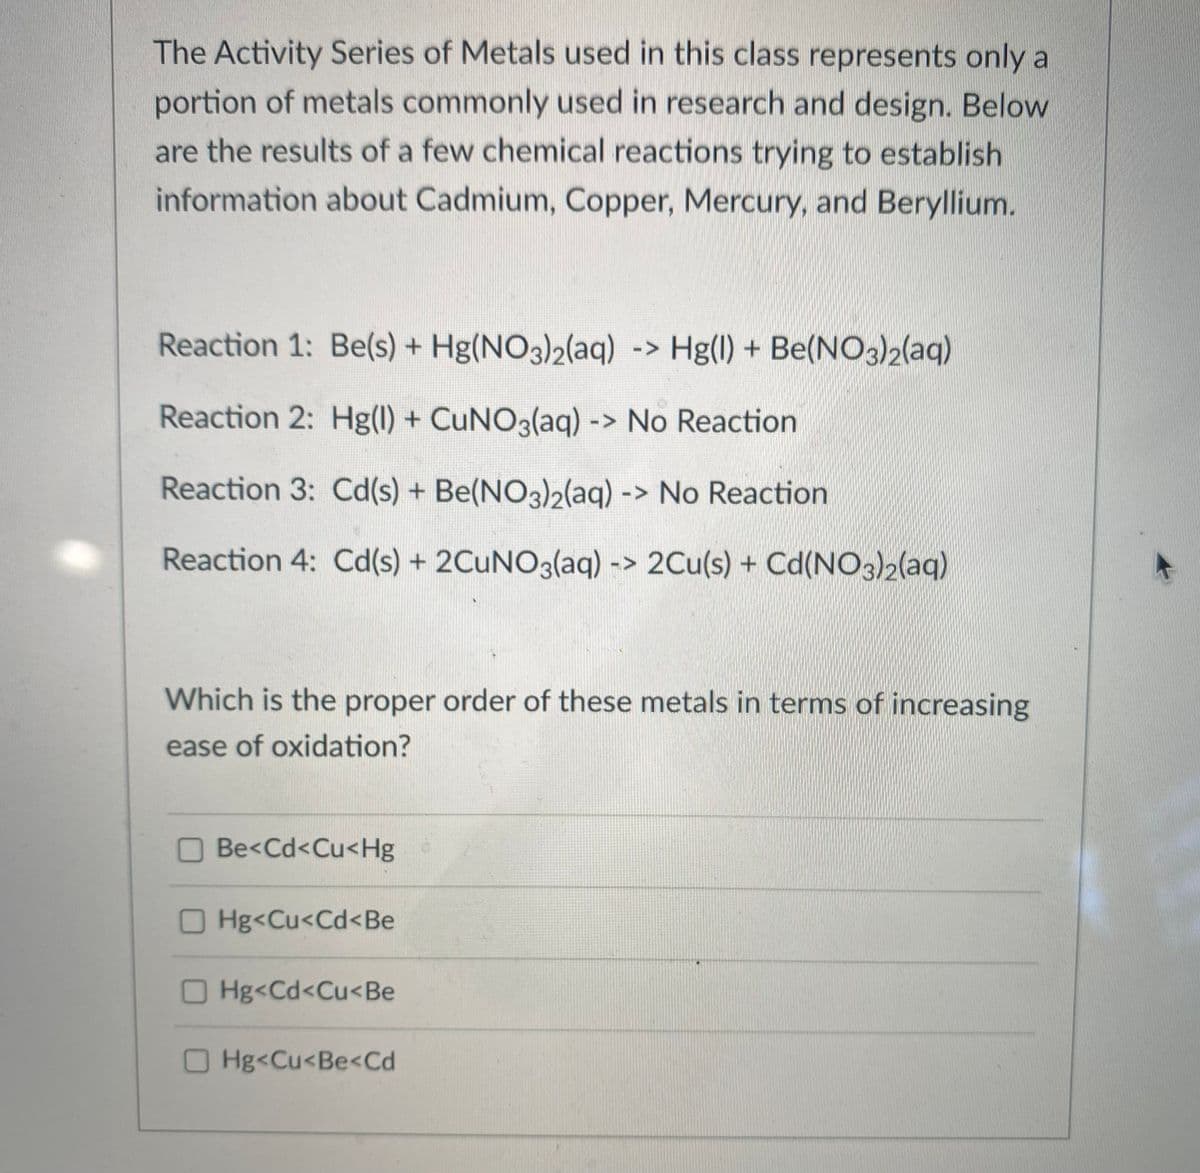 The Activity Series of Metals used in this class represents only a
portion of metals commonly used in research and design. Below
are the results of a few chemical reactions trying to establish
information about Cadmium, Copper, Mercury, and Beryllium.
Reaction 1: Be(s) + Hg(NO3)2(aq) -> Hg(l) + Be(NO3)2(aq)
Reaction 2: Hg(l) + CUNO3(aq) -> No Reaction
Reaction 3: Cd(s) + Be(NO3)2(aq) -> No Reaction
Reaction 4: Cd(s) + 2CUNO3(aq) -> 2Cu(s) + Cd(NO3)2(aq)
Which is the proper order of these metals in terms of increasing
ease of oxidation?
O Be<Cd<Cu<Hg
O Hg<Cu<Cd<Be
OHg<Cd<Cu<Be
O Hg<Cu<Be<Cd
